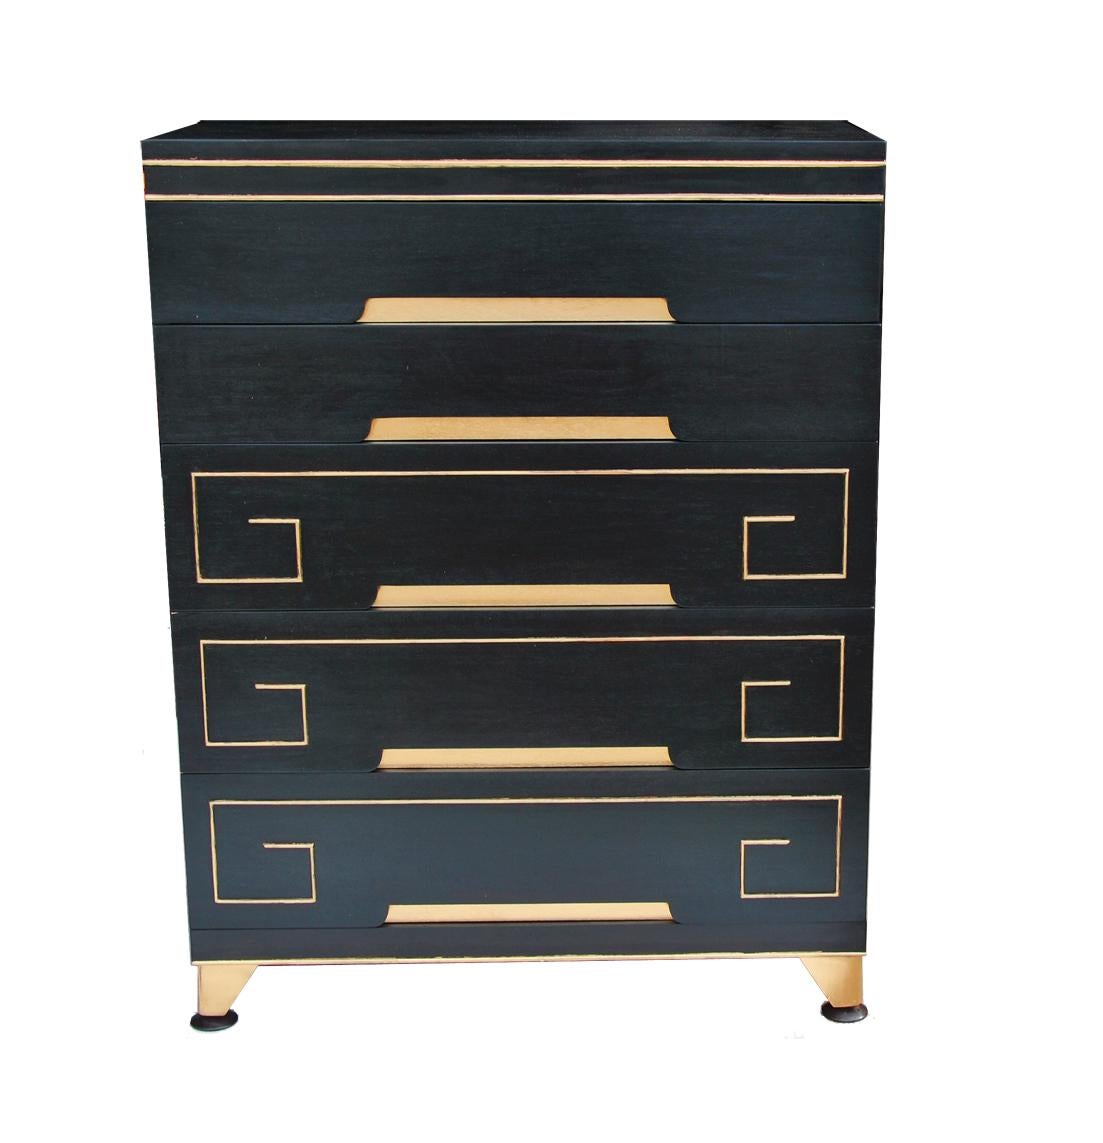 Hollywood Regency Dresser

Tall 5 drawer ebonized dresser with Greek key details. Recessed pulls and tapered legs accented in gold.

Restored.
 

 